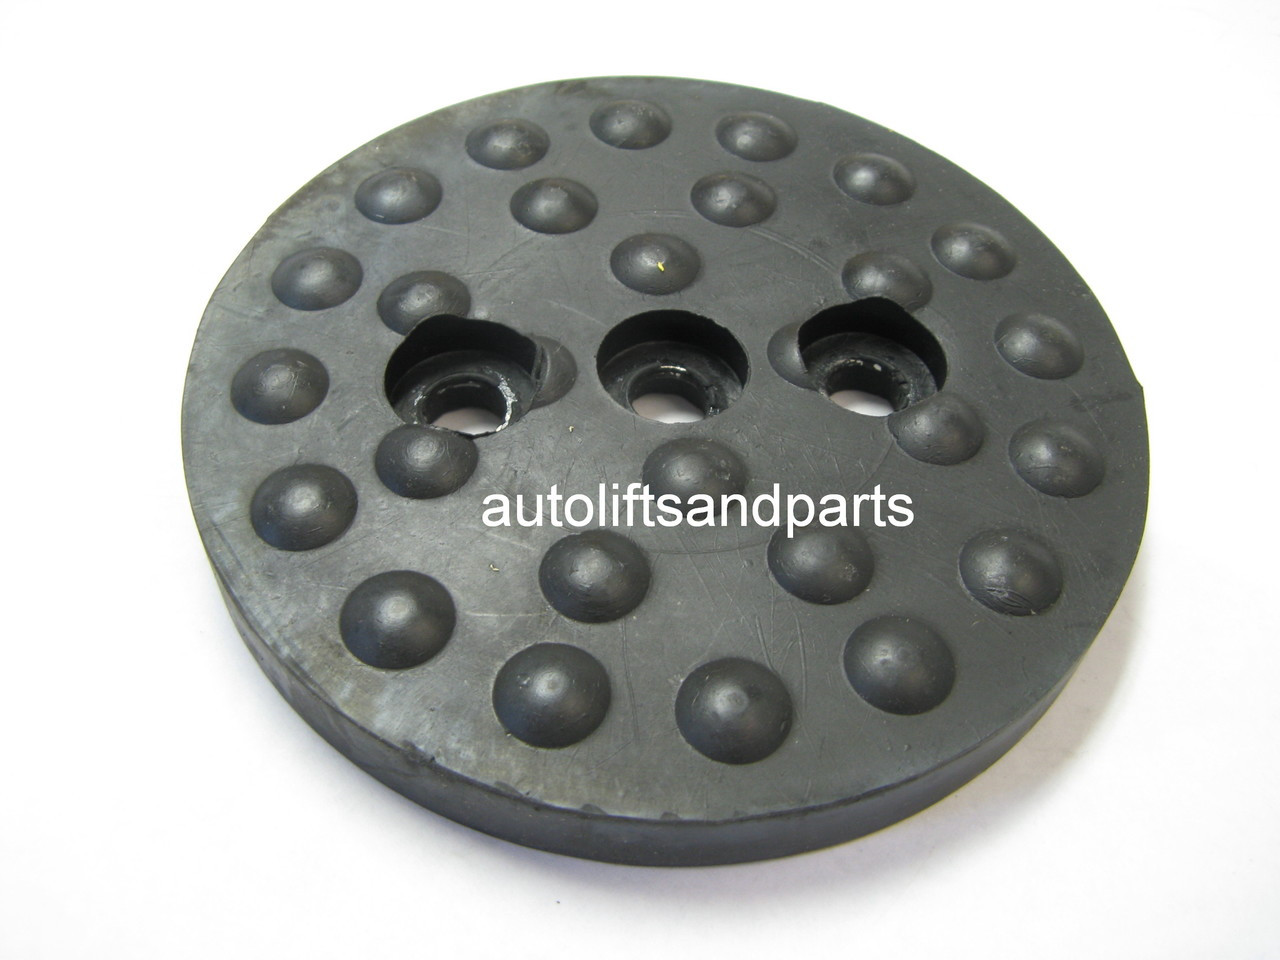 Rubber Lift Arm Pad for Direct Lift Set of 4